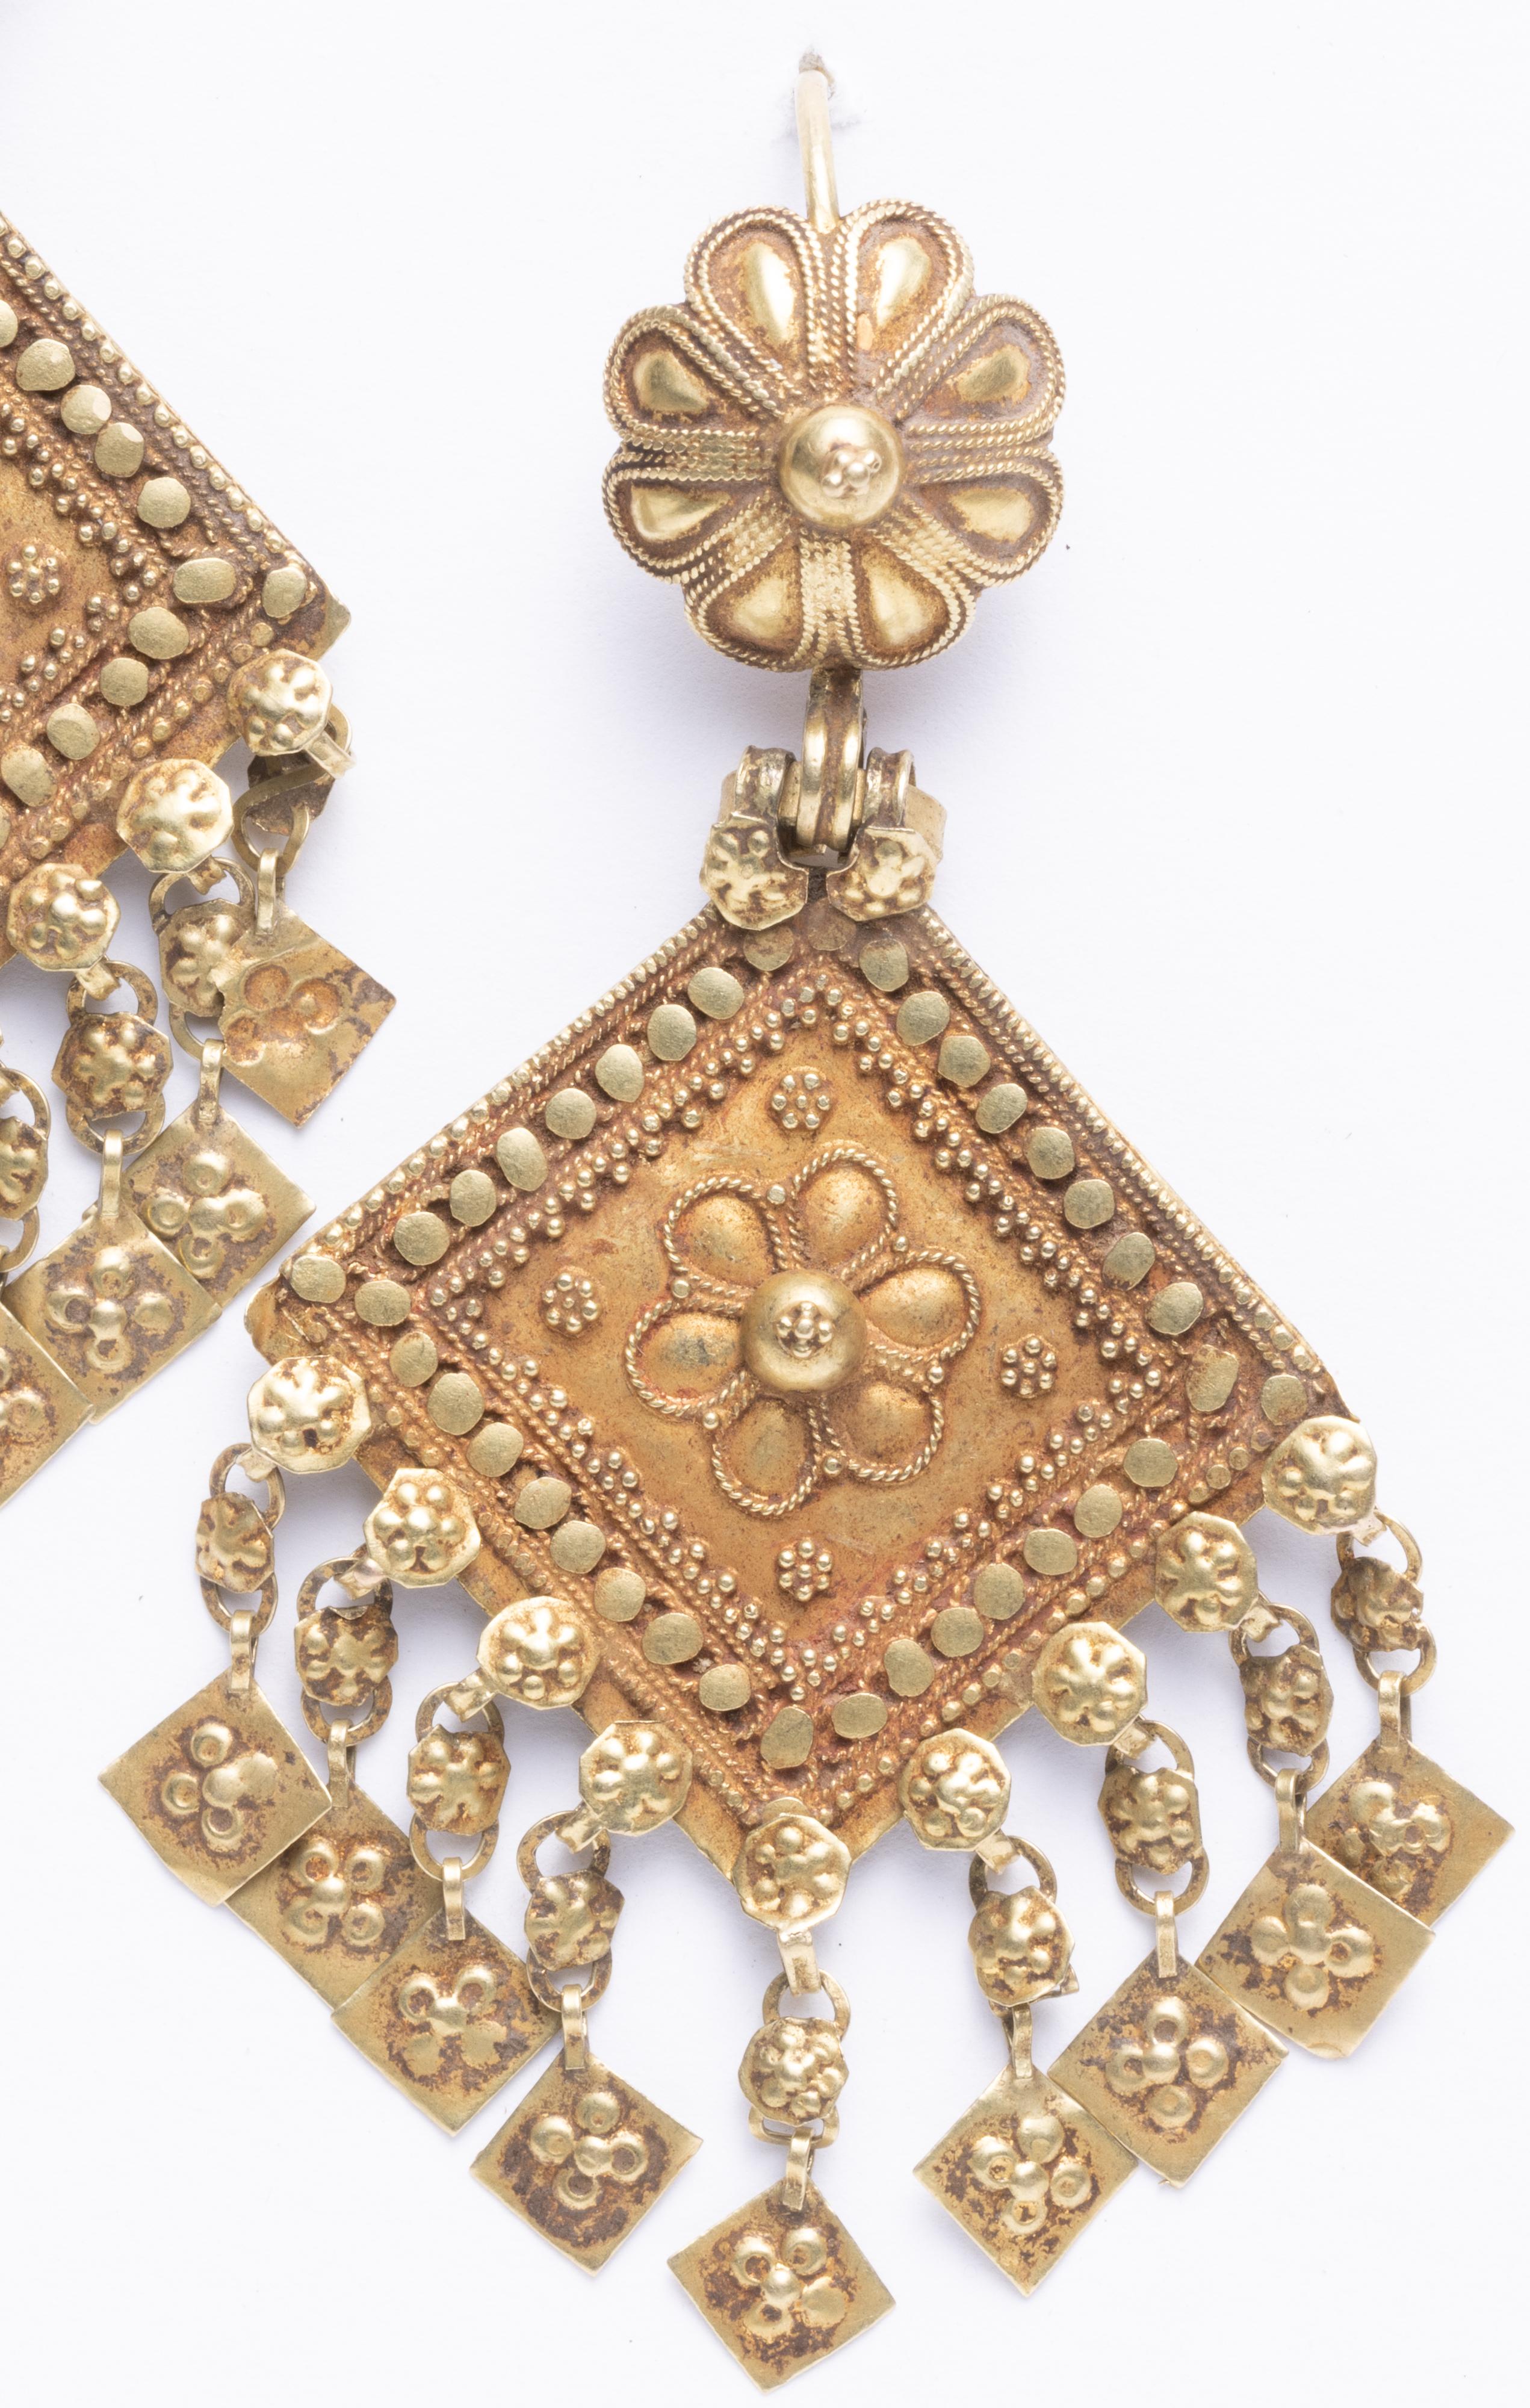 An exquisite pair of 22K gold Indian earrings from Gujarat.  Beautiful hand-tooling and granulation work indicative of the incredible Indian goldsmiths.  Dates to the early 1900's.  A gold French wire, for pierced ears only.